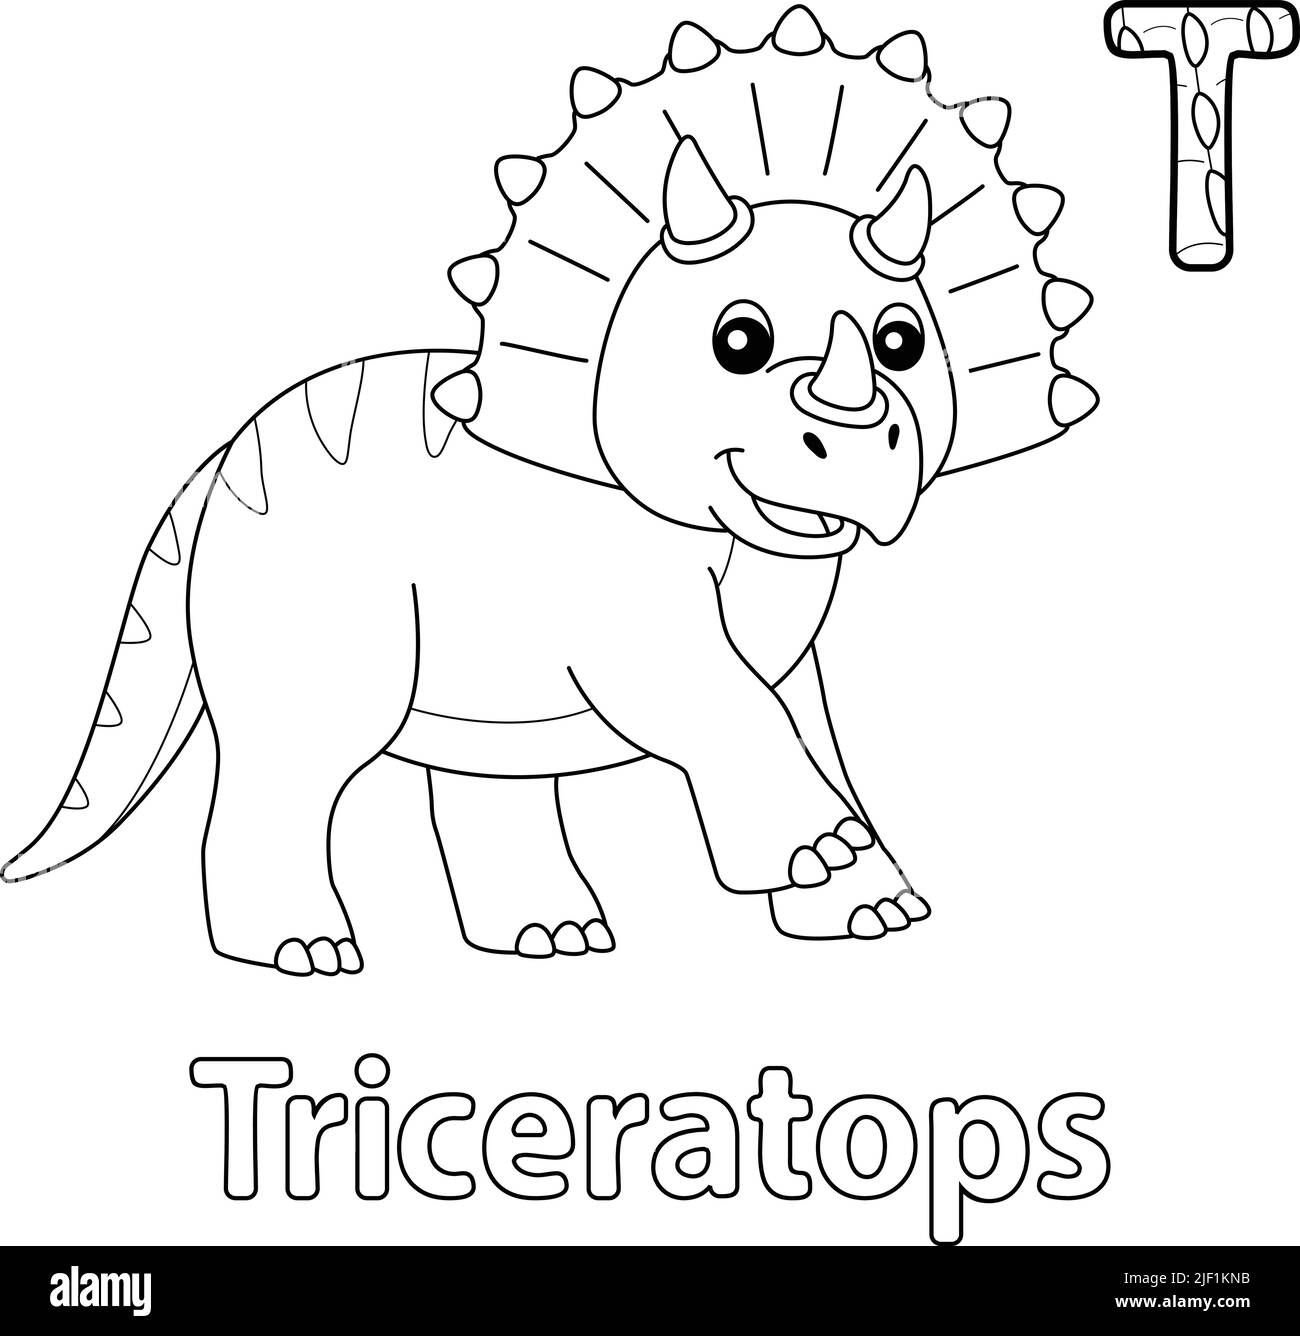 Triceratops Alphabet Dinosaur ABC Coloring Page T Stock Vector